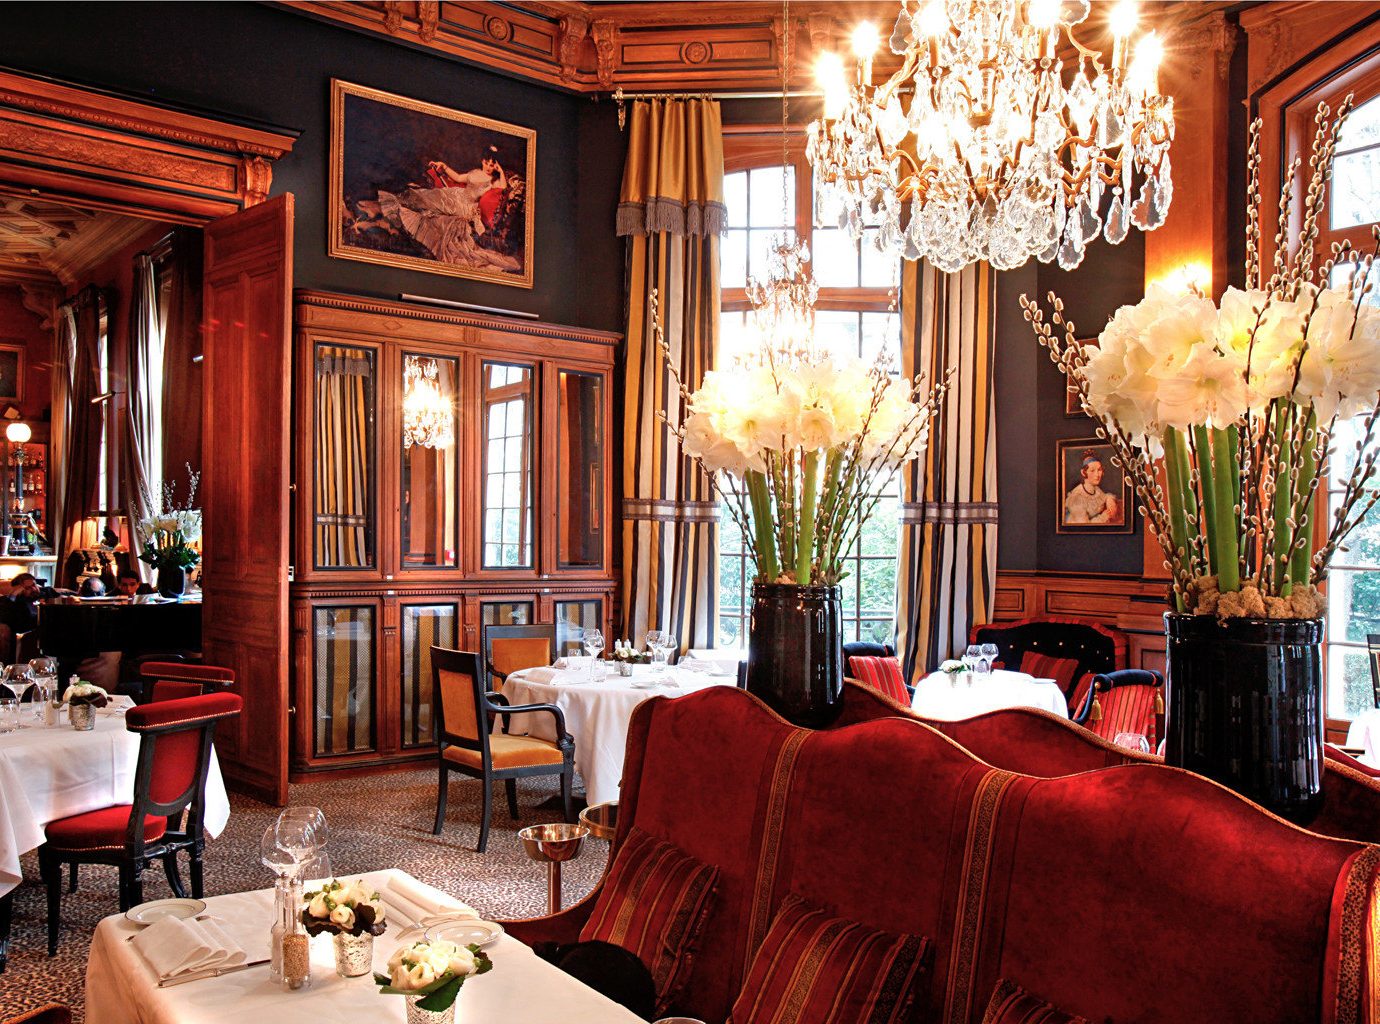 City Dining Drink Eat Elegant France Historic Hotels Lounge Paris Romantic indoor room window Living sofa chair restaurant ceiling dining room estate meal decorated red interior design home furniture function hall Bar nice living room mansion palace area leather